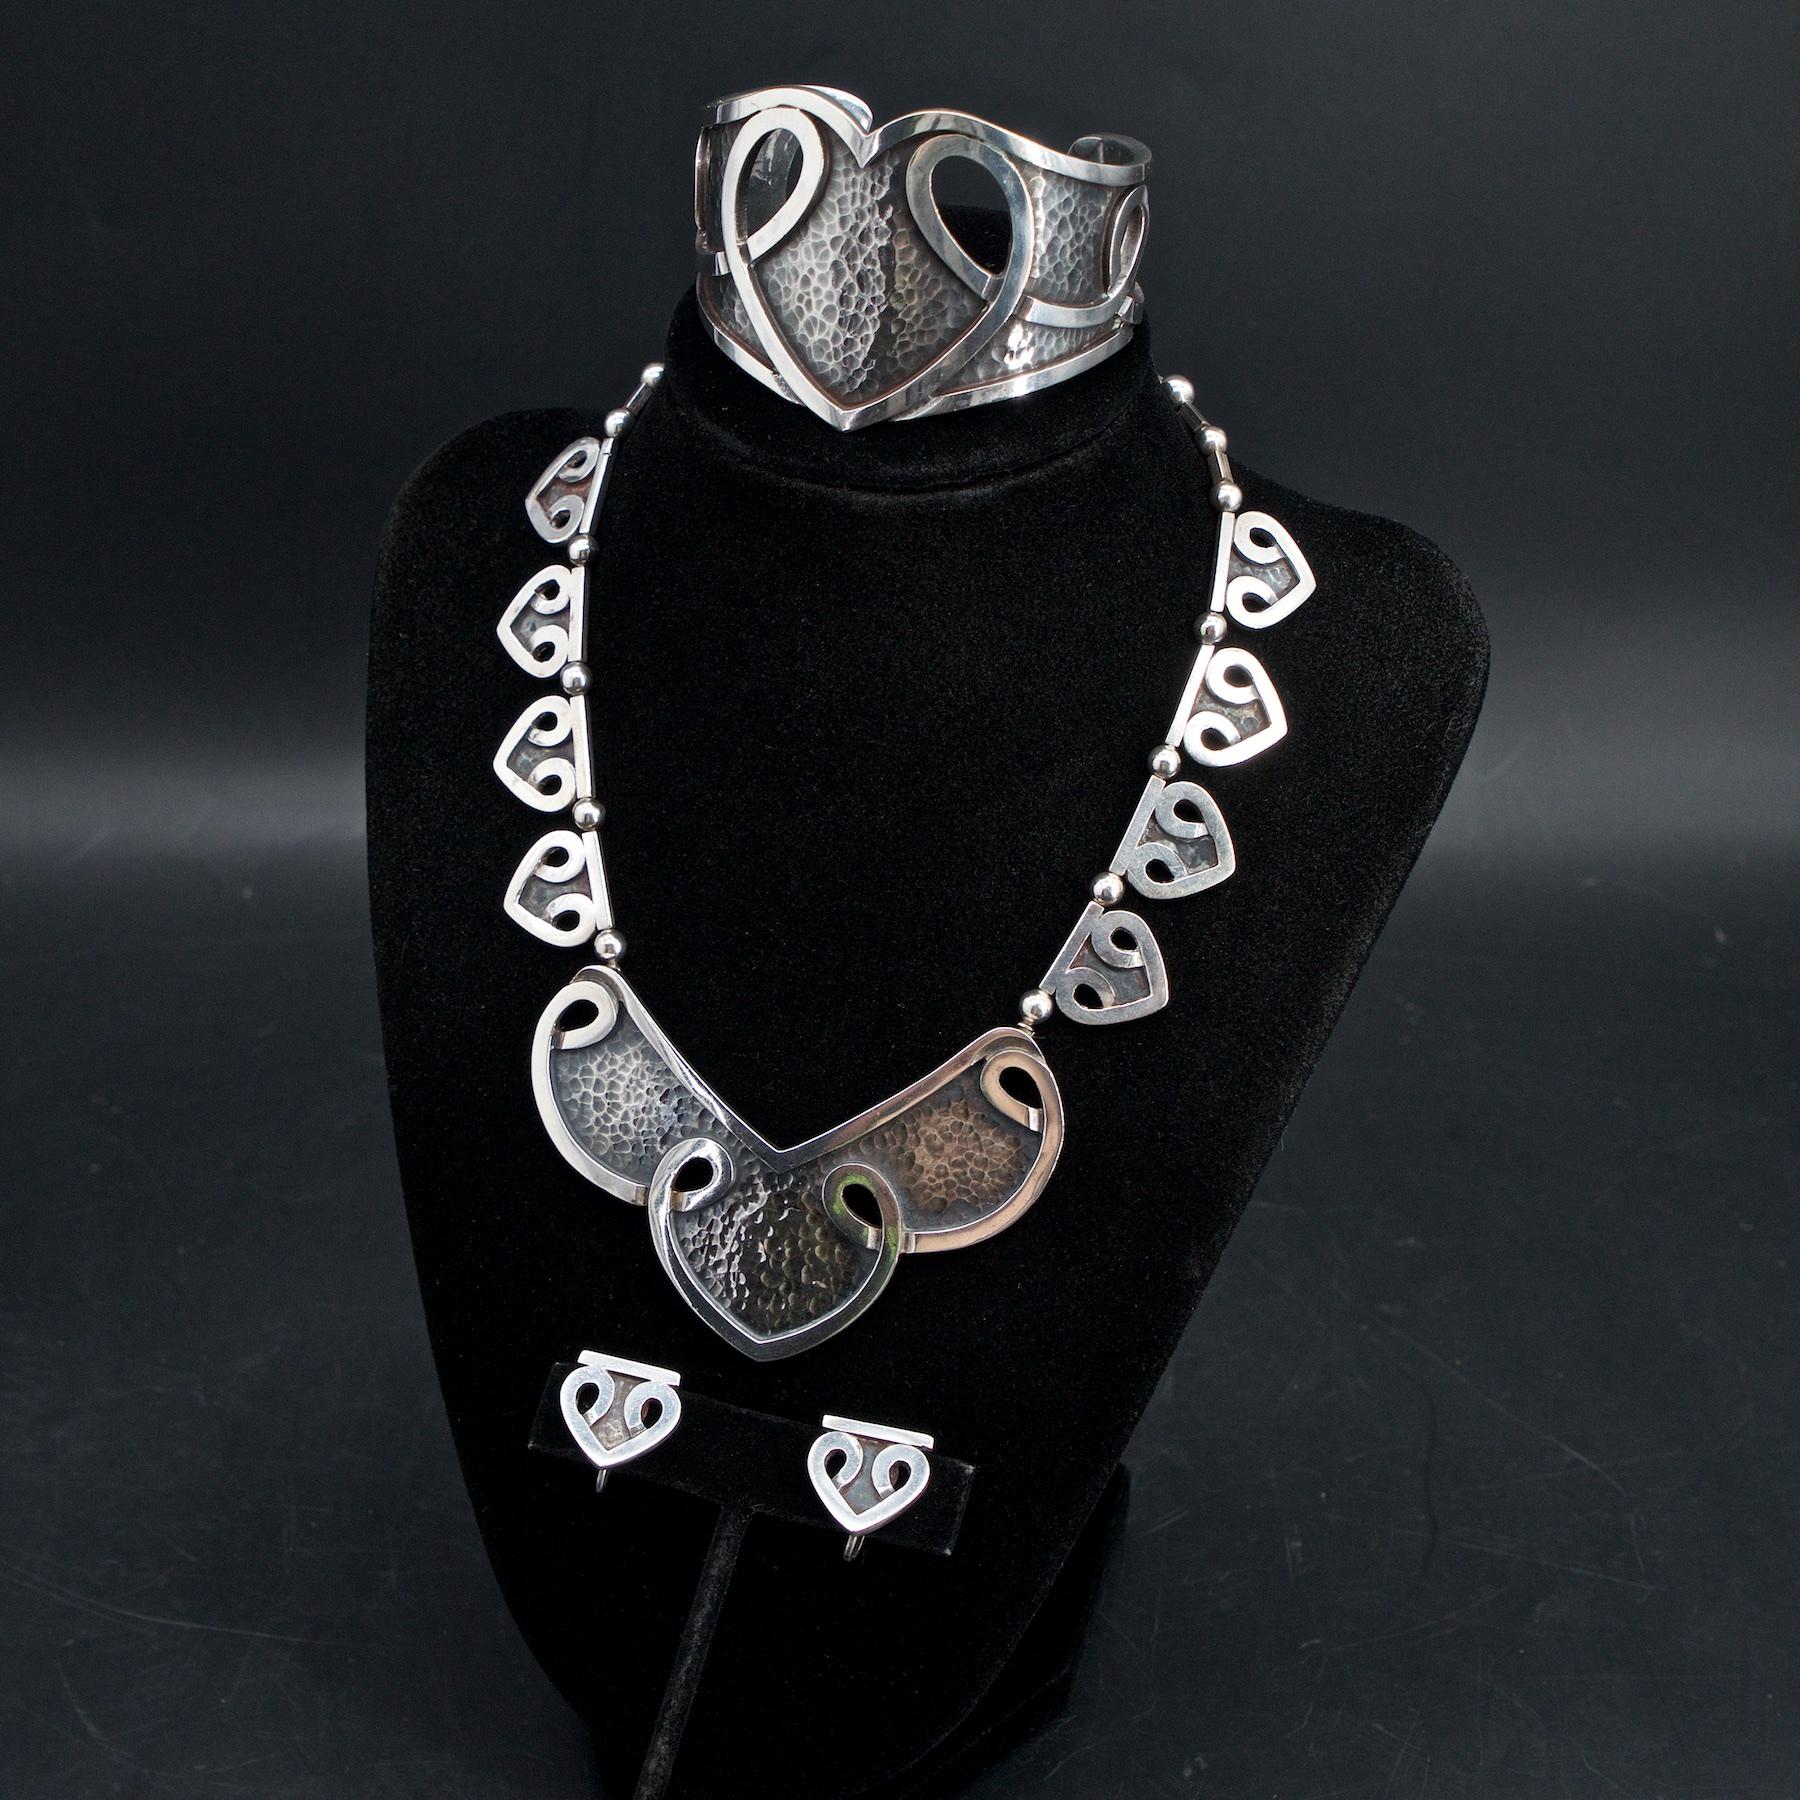 Margot Van Voorhies Carr started producing out of her own studio in 1948, under the name, Margot de Taxco. Previously she had been producing pieces under Antonio Castillo for the William Spratling studio. This four piece sterling silver suite is